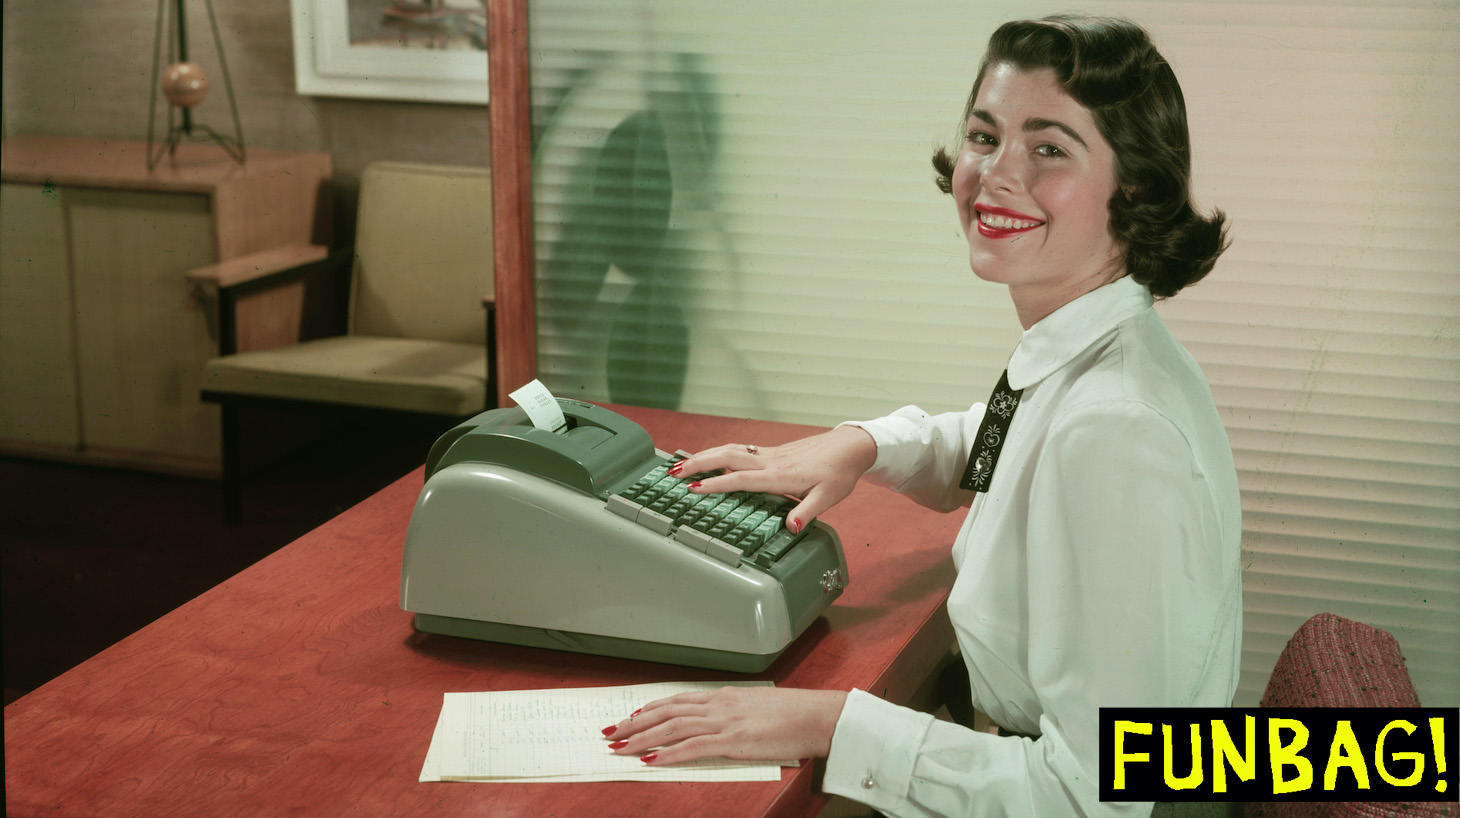 A young woman smiles as she poses at a desk in an office-like environment, one hand on a document and the other on the keys of a Clary adding machine, mid to late 1950s. (Photo by Tom Kelley/Getty Images)